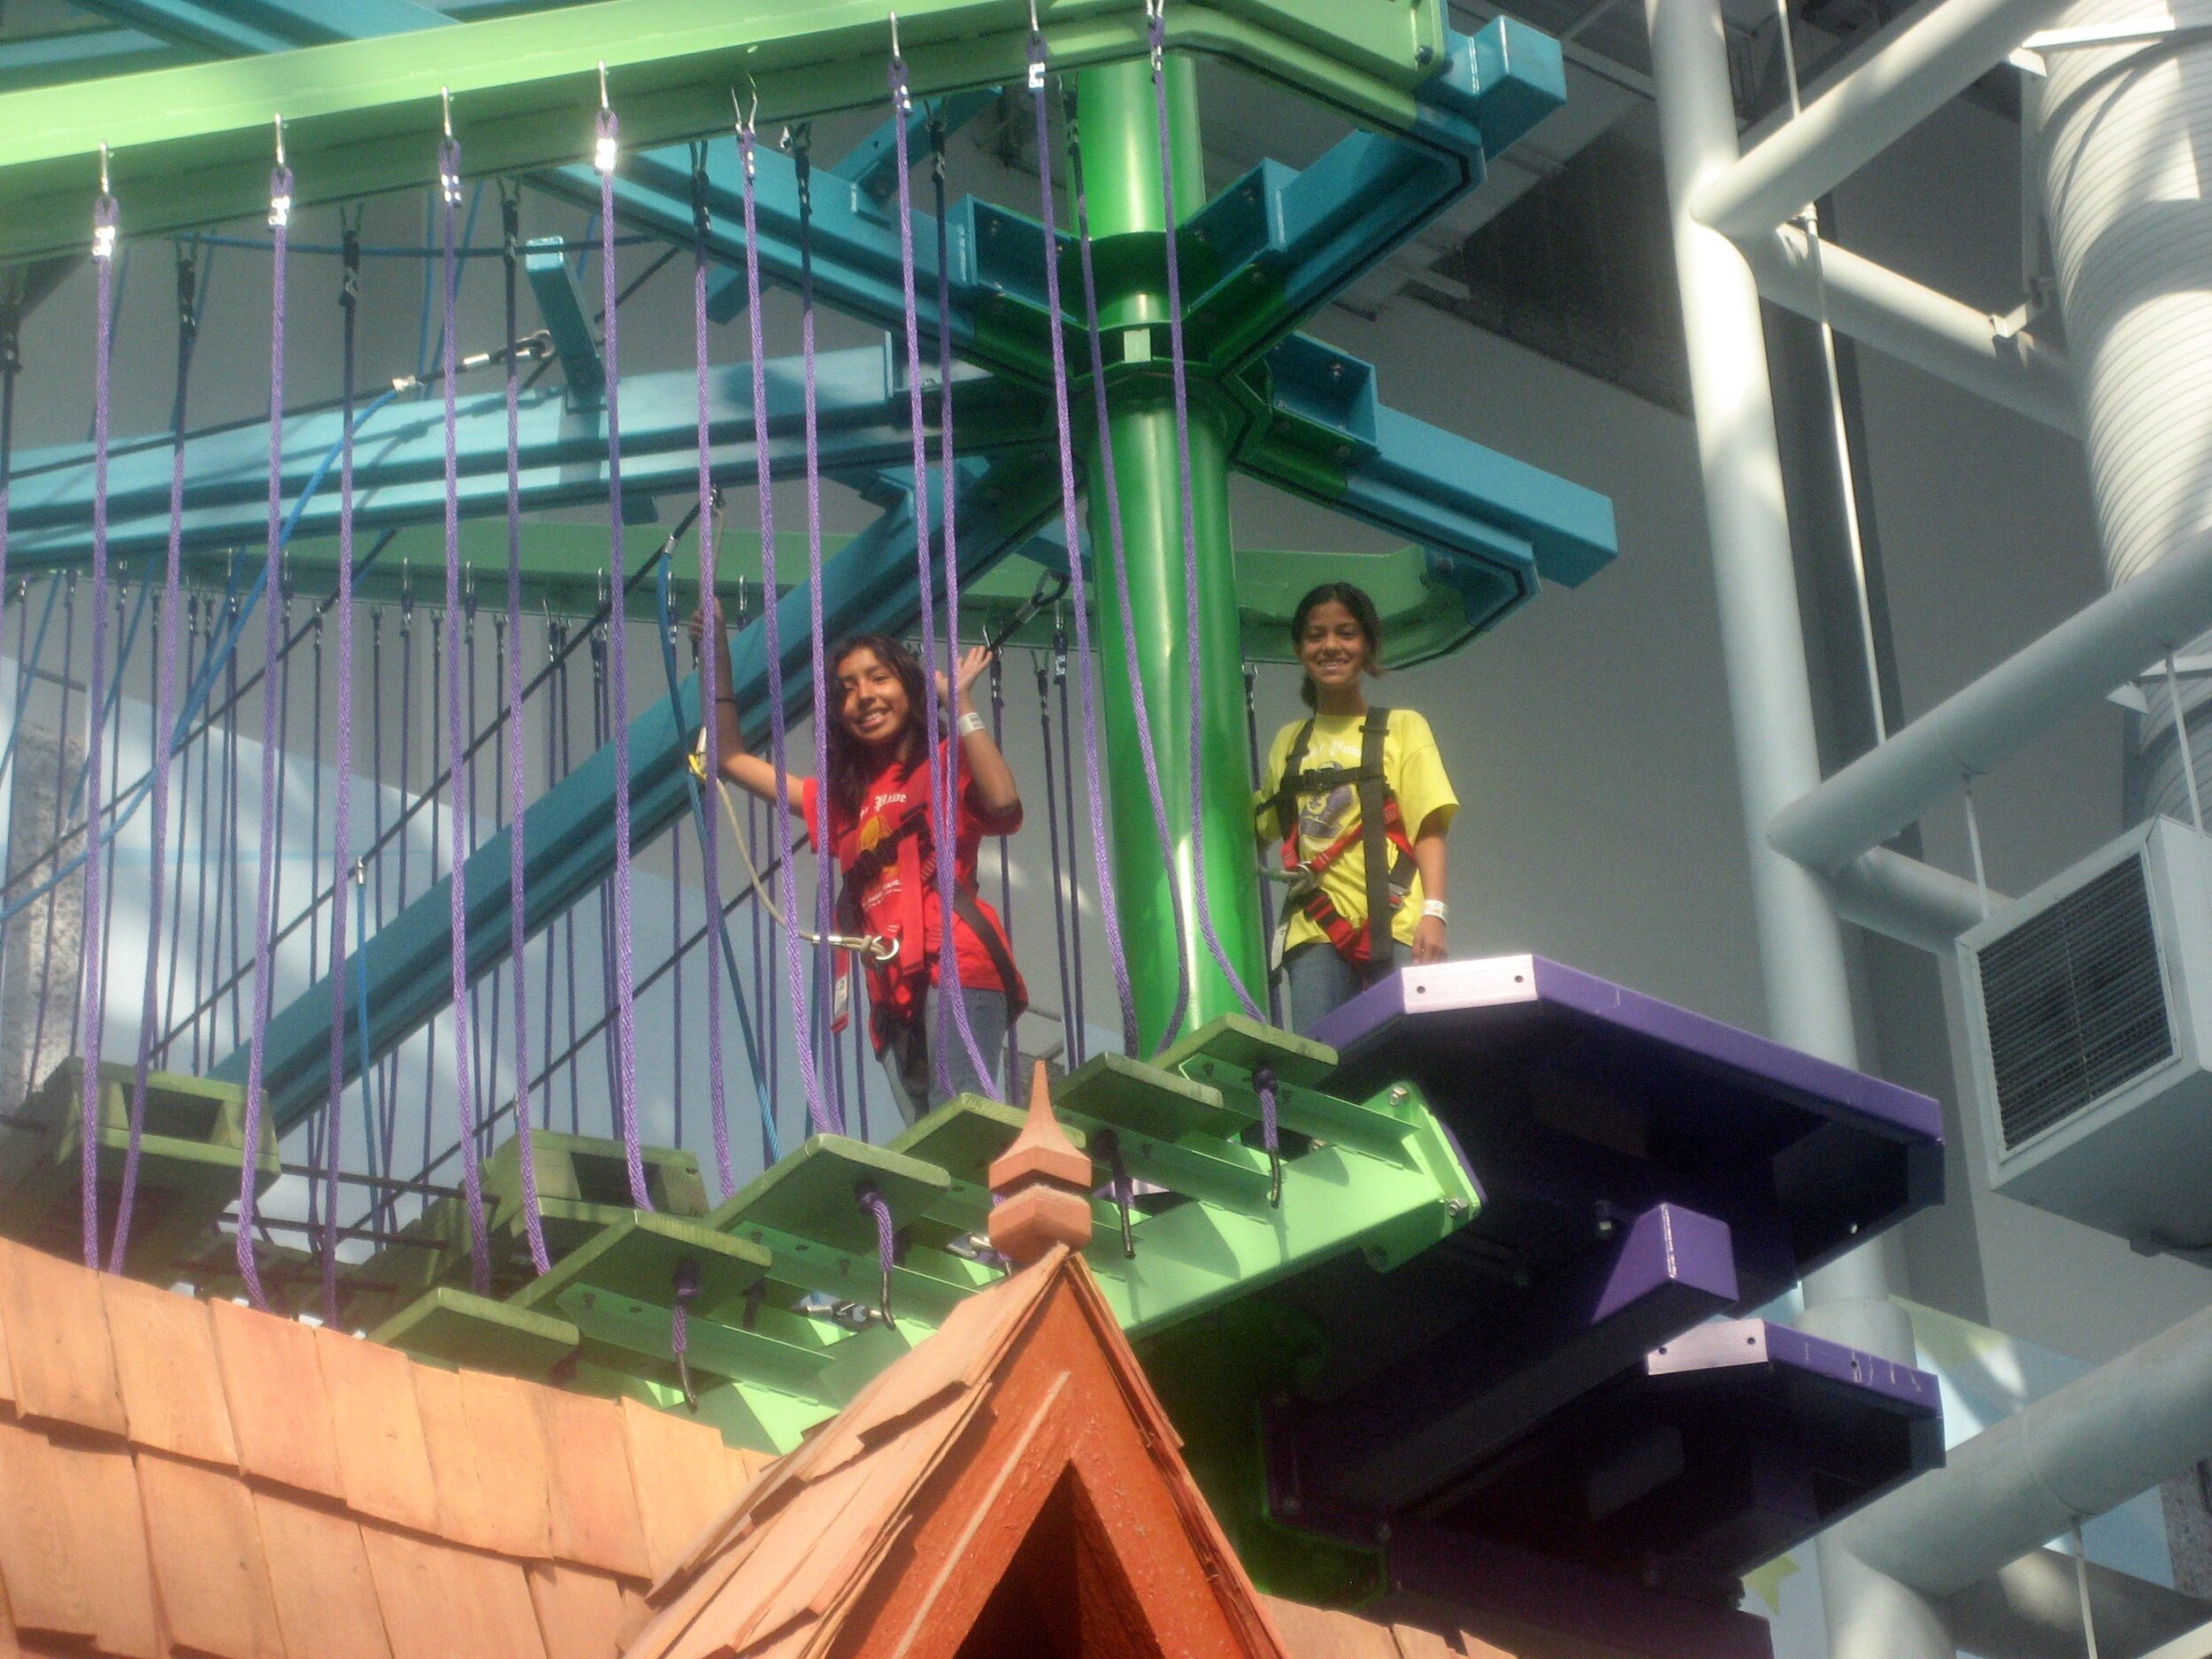  Enjoying the Rope Course at Mall of America 